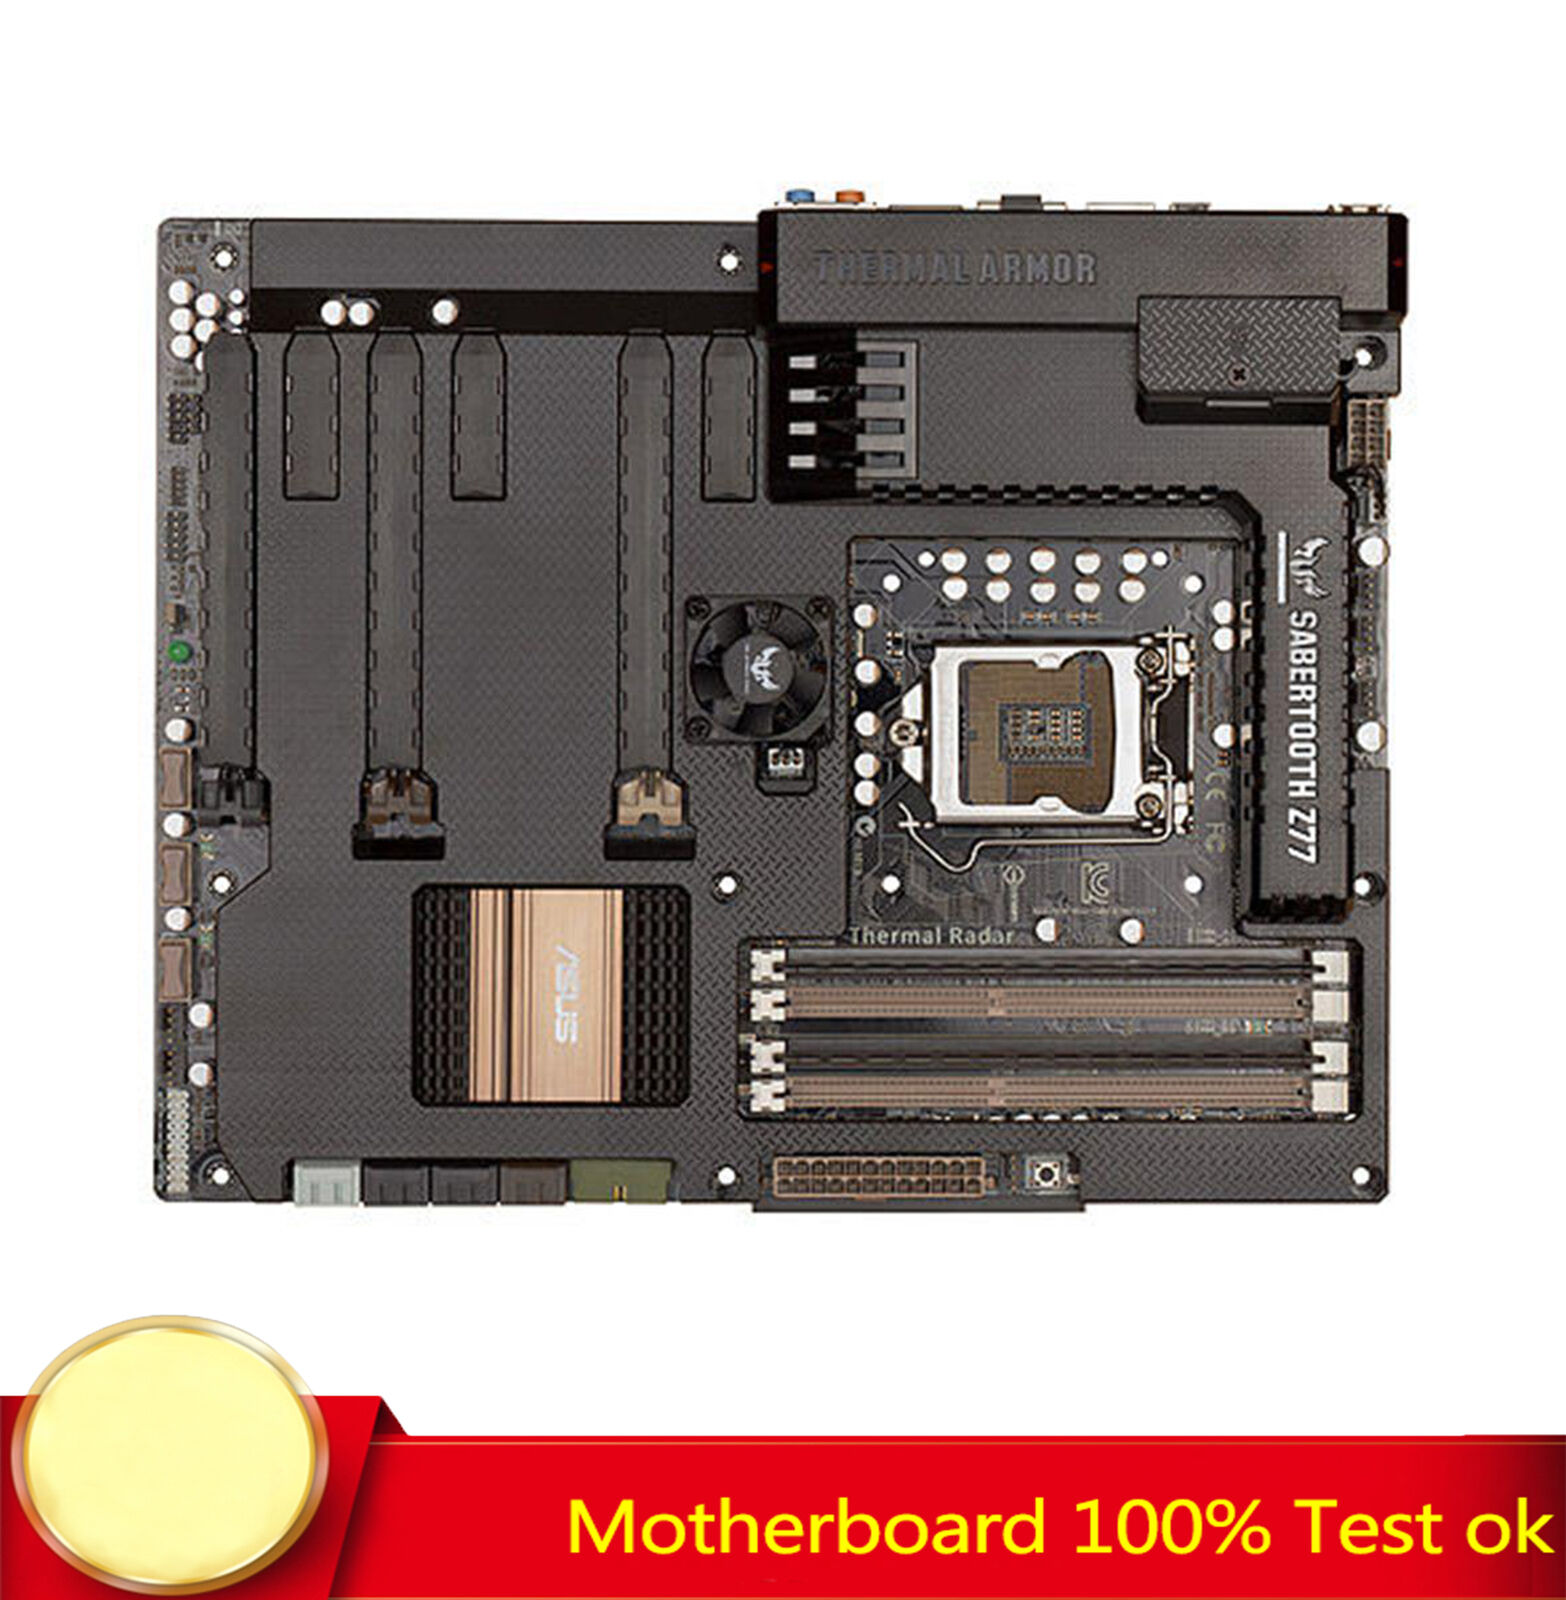 FOR ASUS TUF SABERTOOTH Z77 Motherboard Supports LGA1155 32GB Z77 100% Test Work